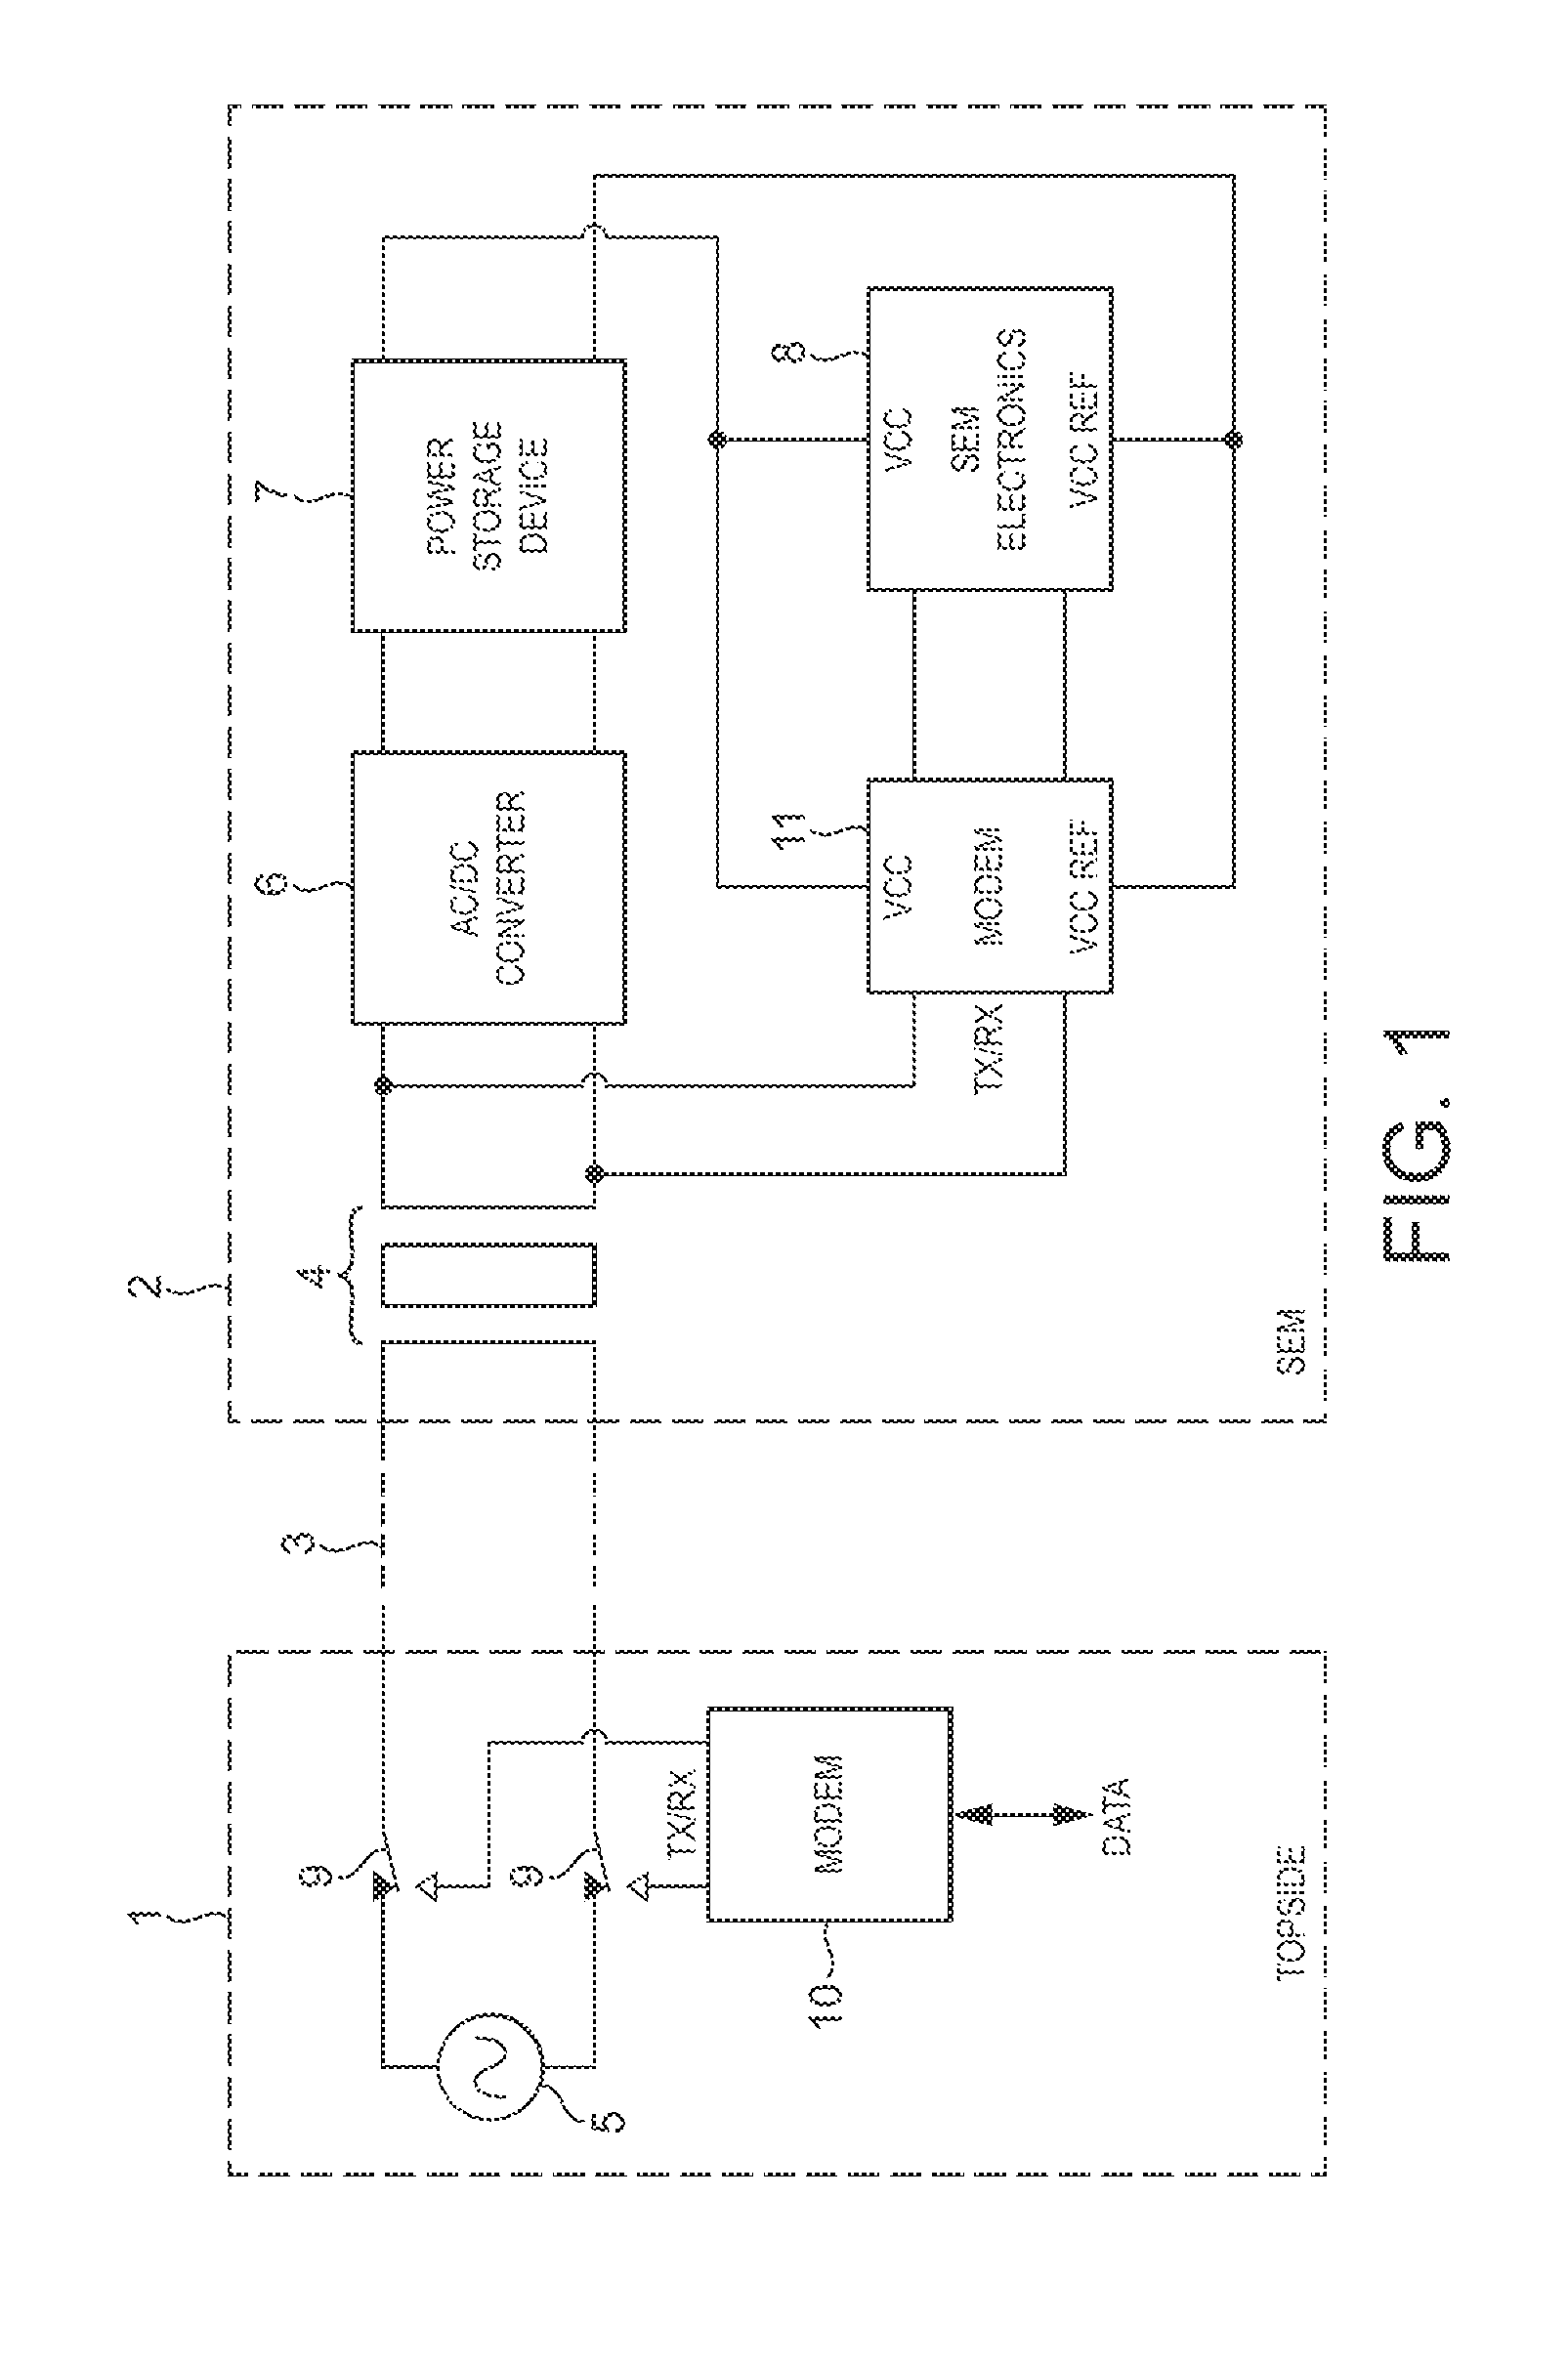 Transmitting electrical power and communication signals